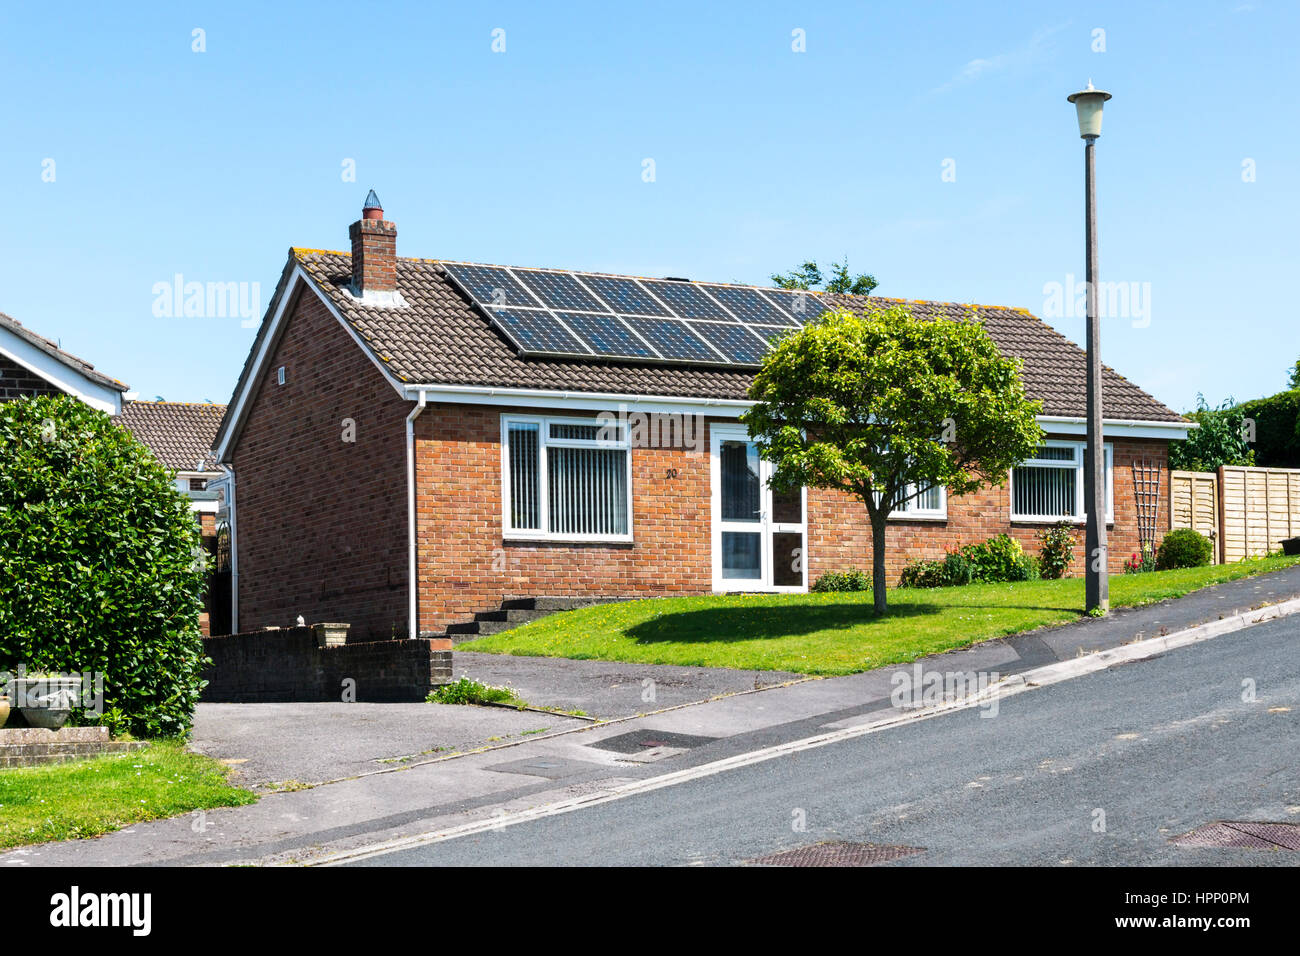 Solar panels on the roof of a small bungalow on a summer day with bright blue sky. Stock Photo